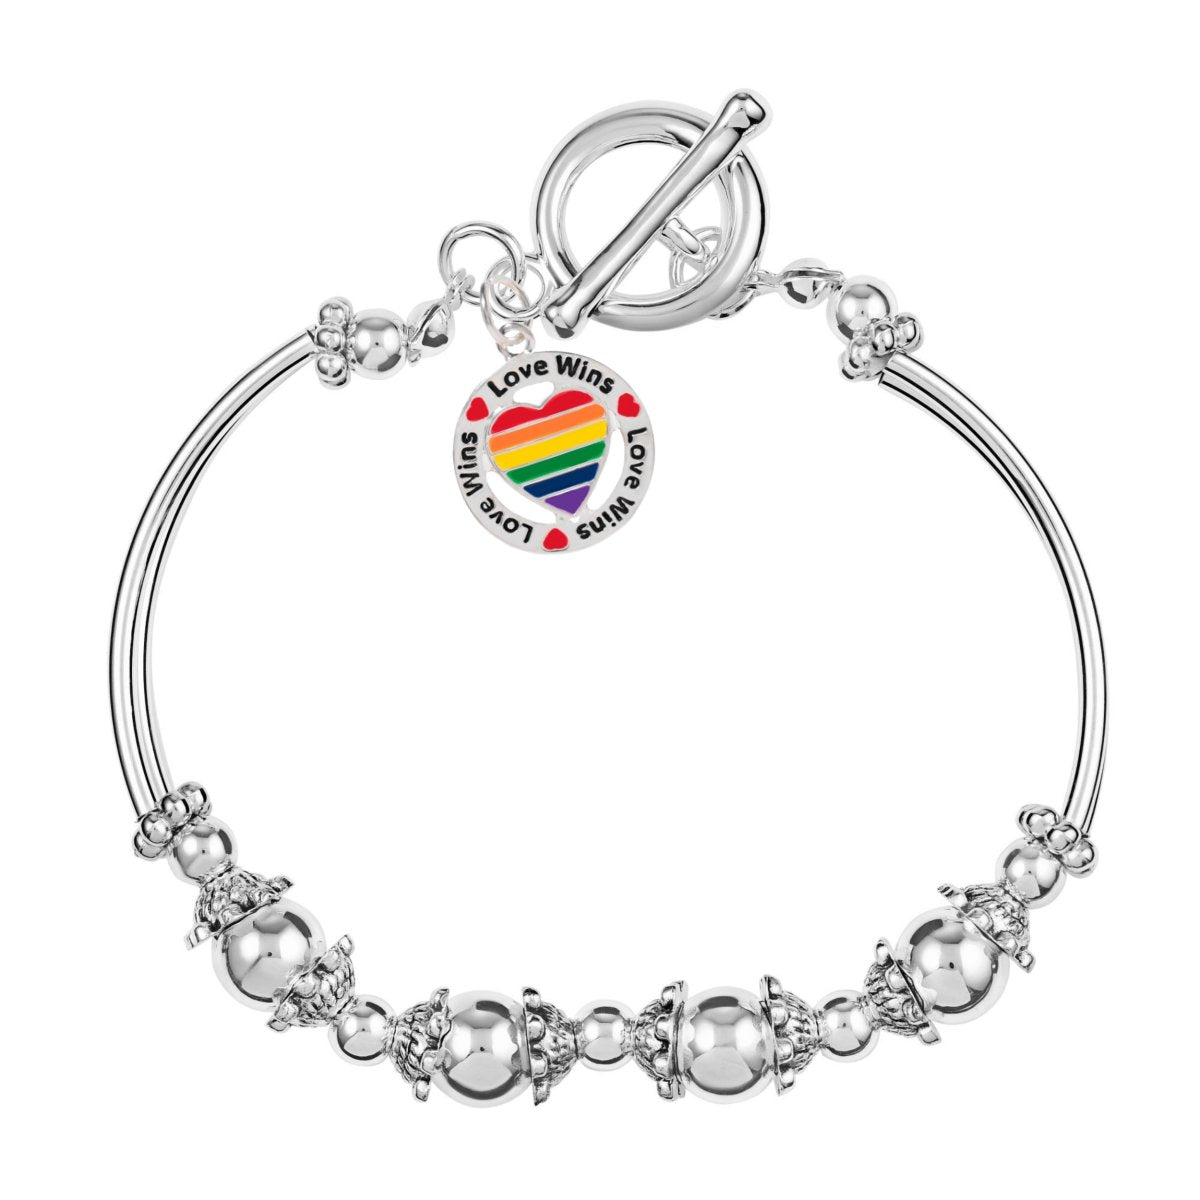 Round Rainbow Heart Love Wins Partial Beaded Bracelets - Fundraising For A Cause